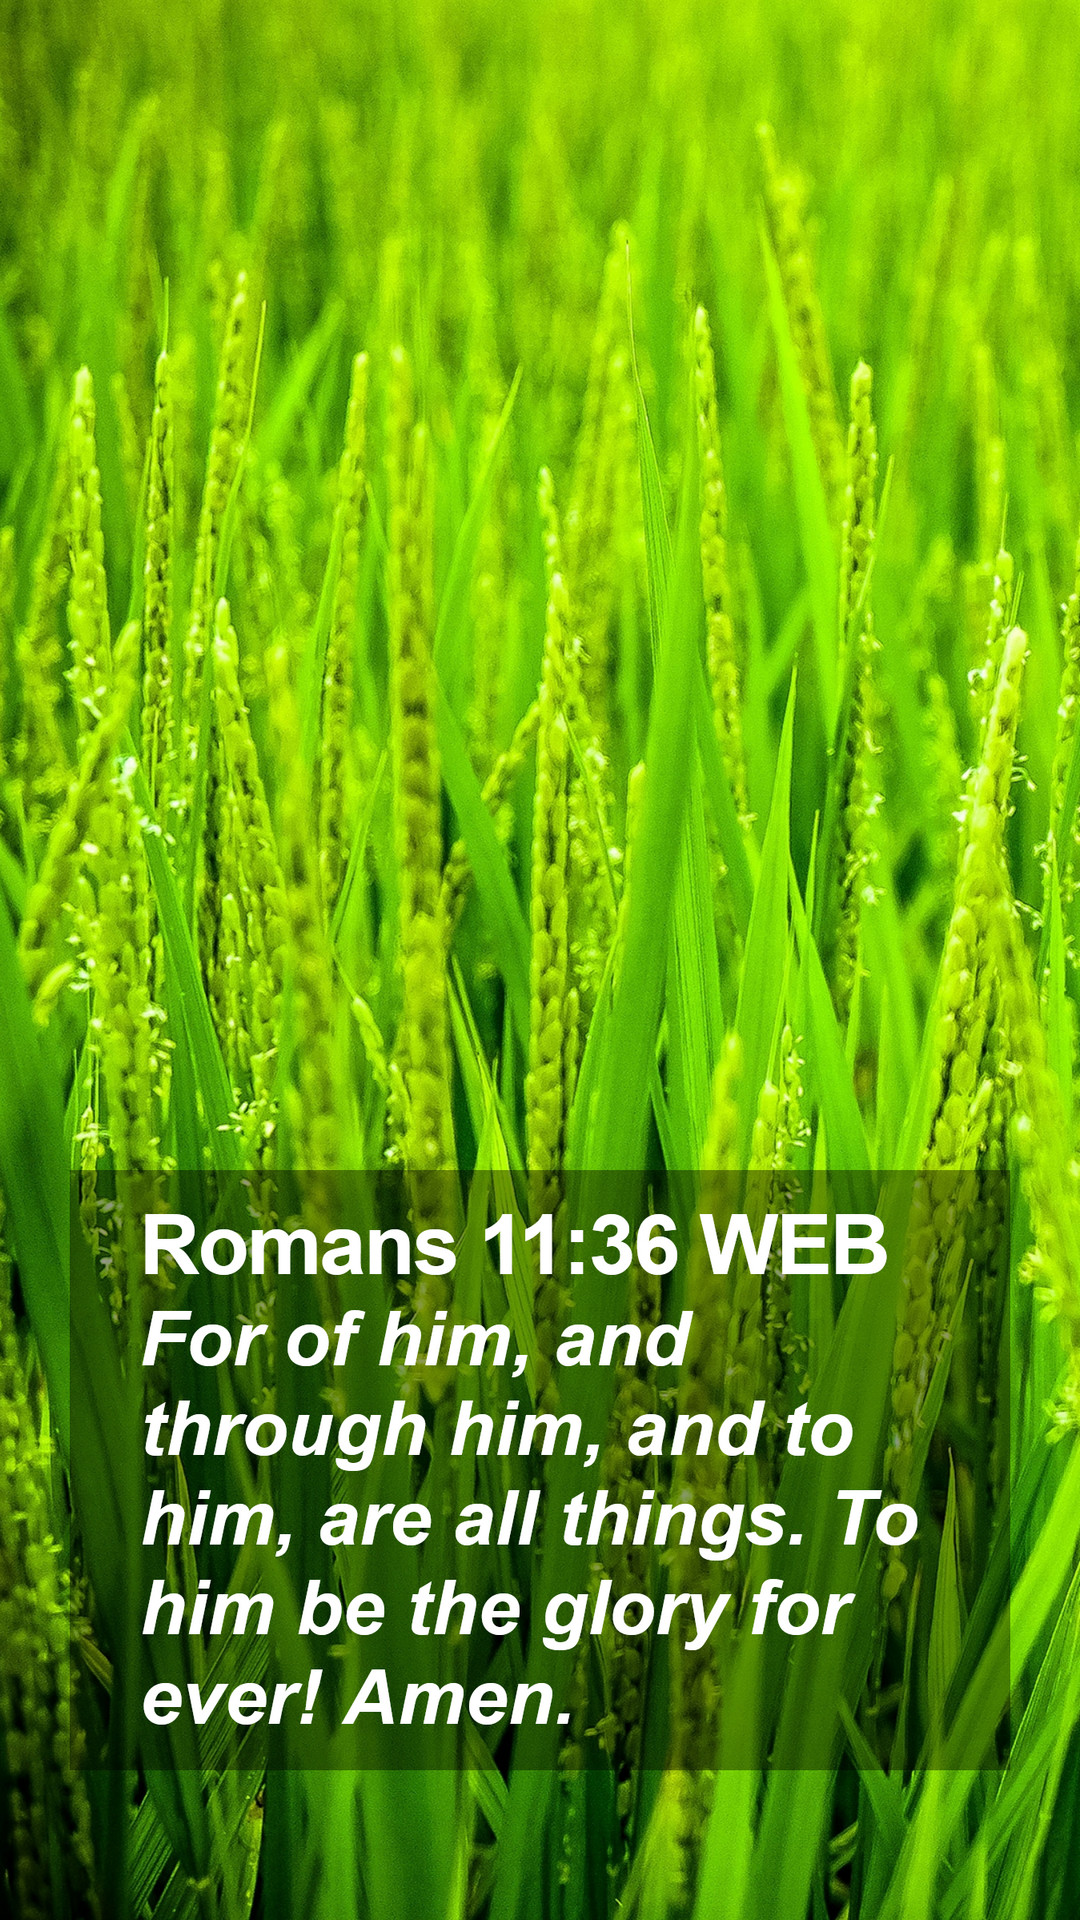 Romans 11:36 WEB Mobile Phone Wallpaper of him, and through him, and to him, are all